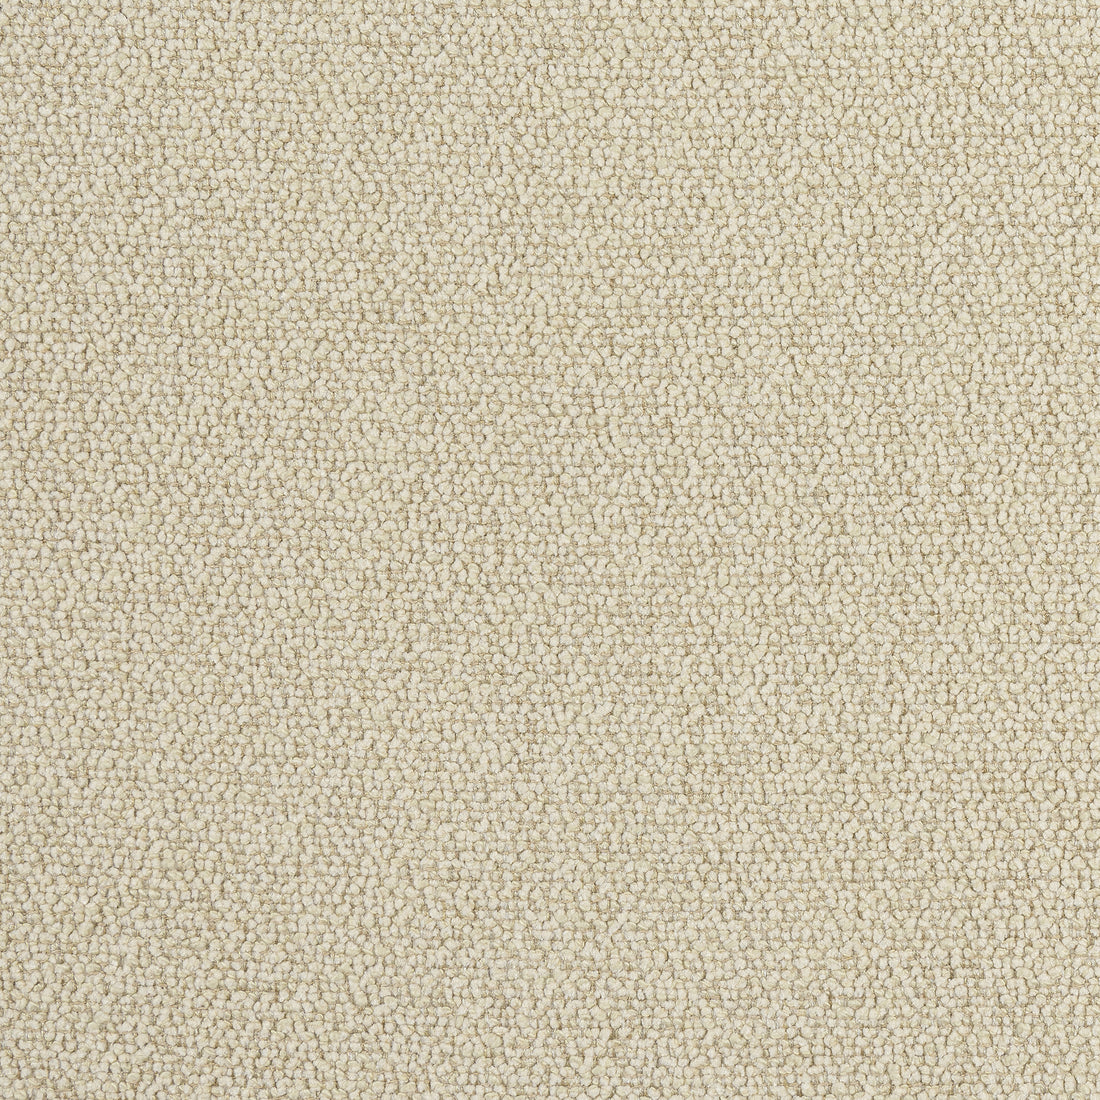 Dolcetto fabric in cashmere color - pattern number W8143 - by Thibaut in the Sereno collection